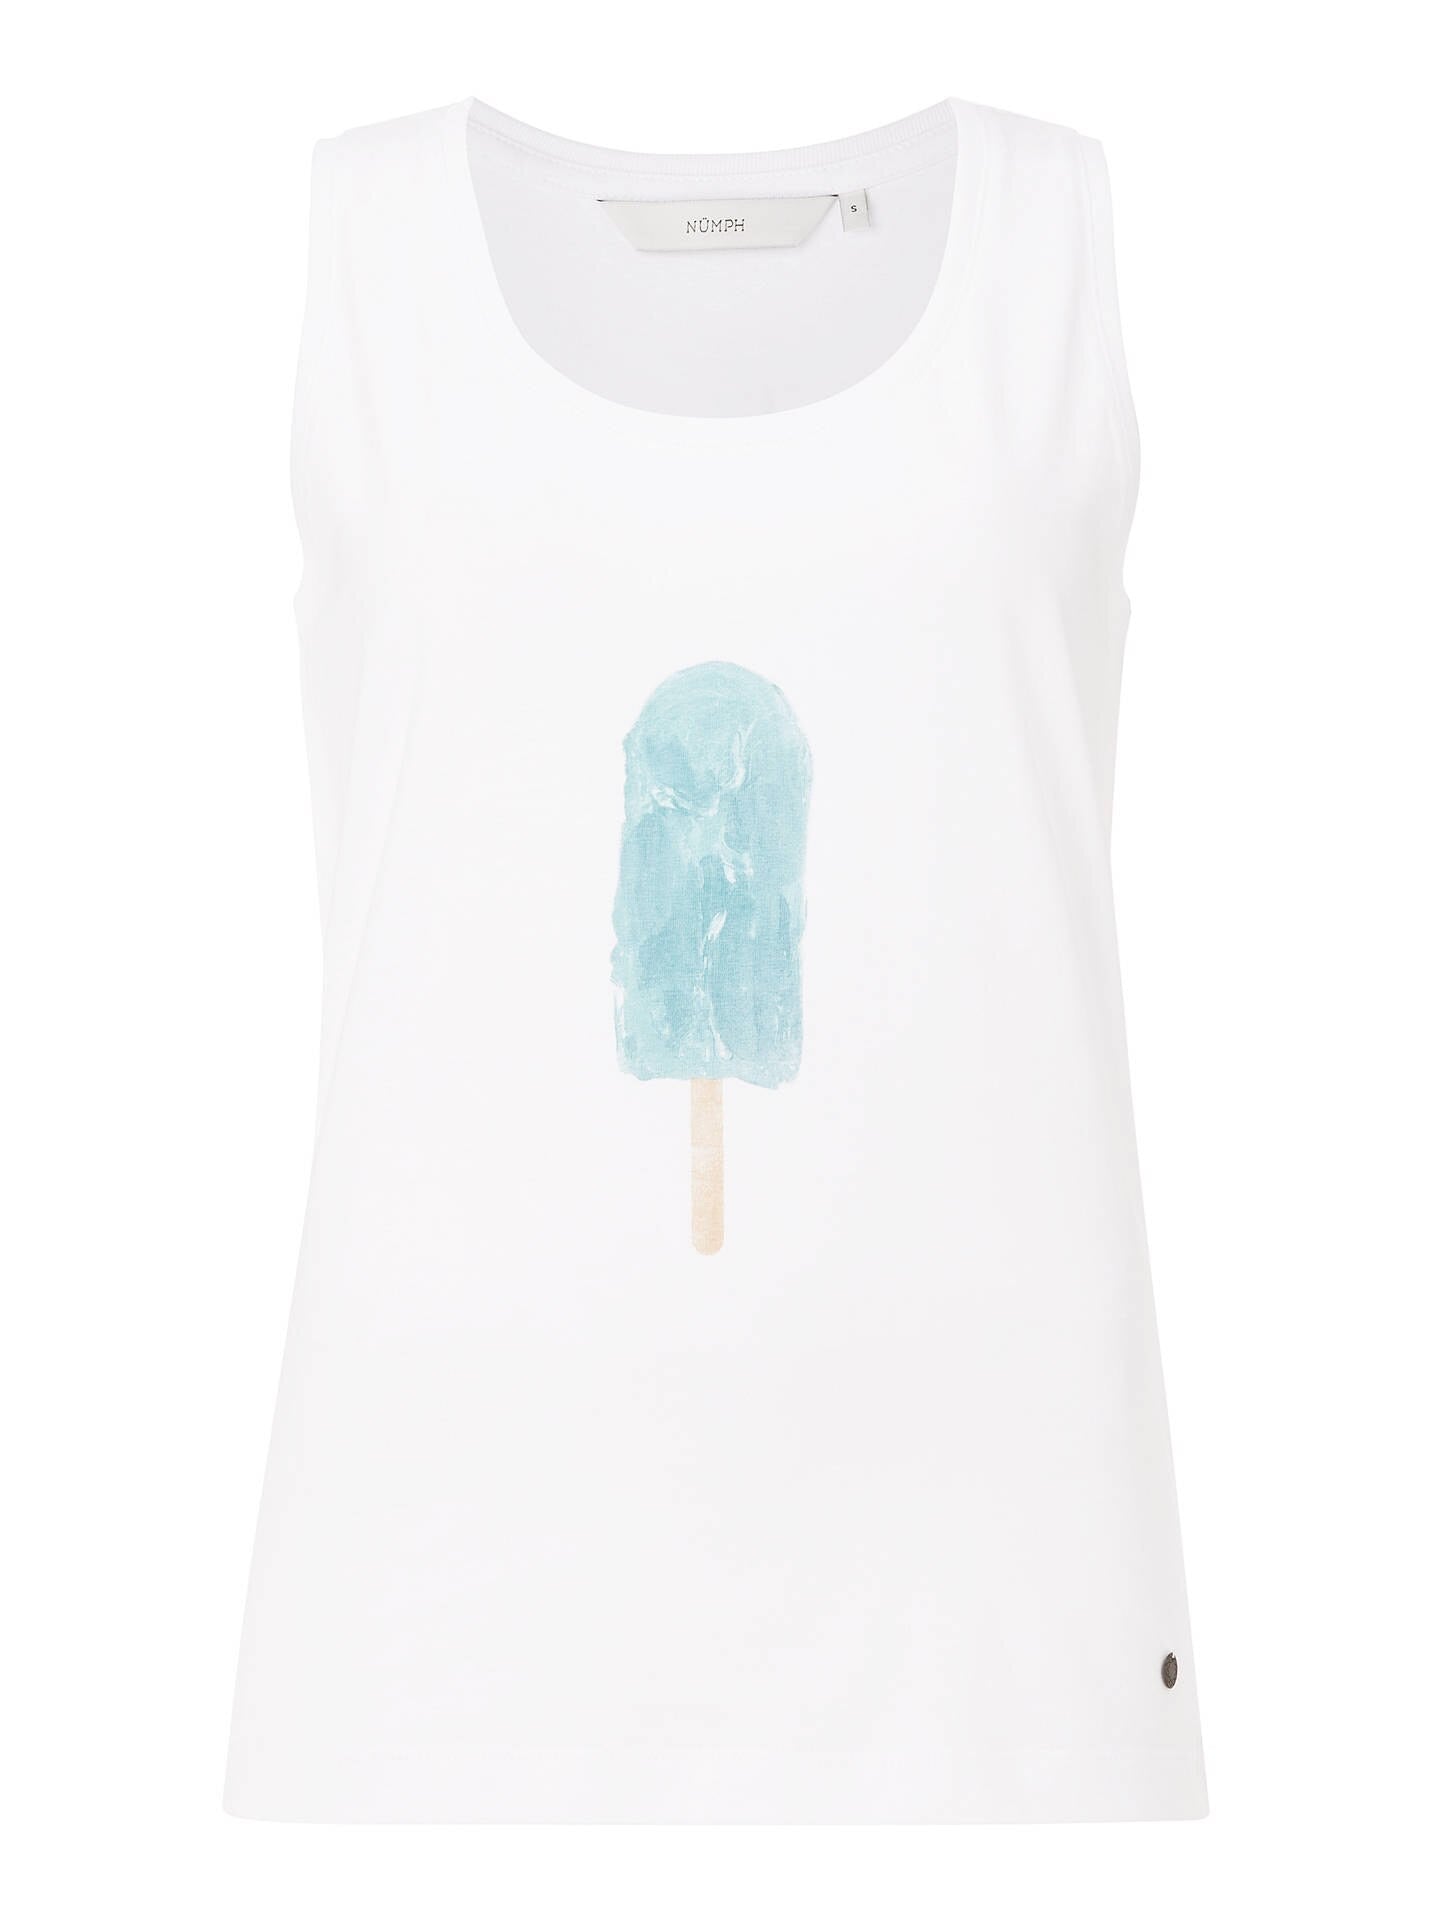 Kailani Ice Lolly Vest Top